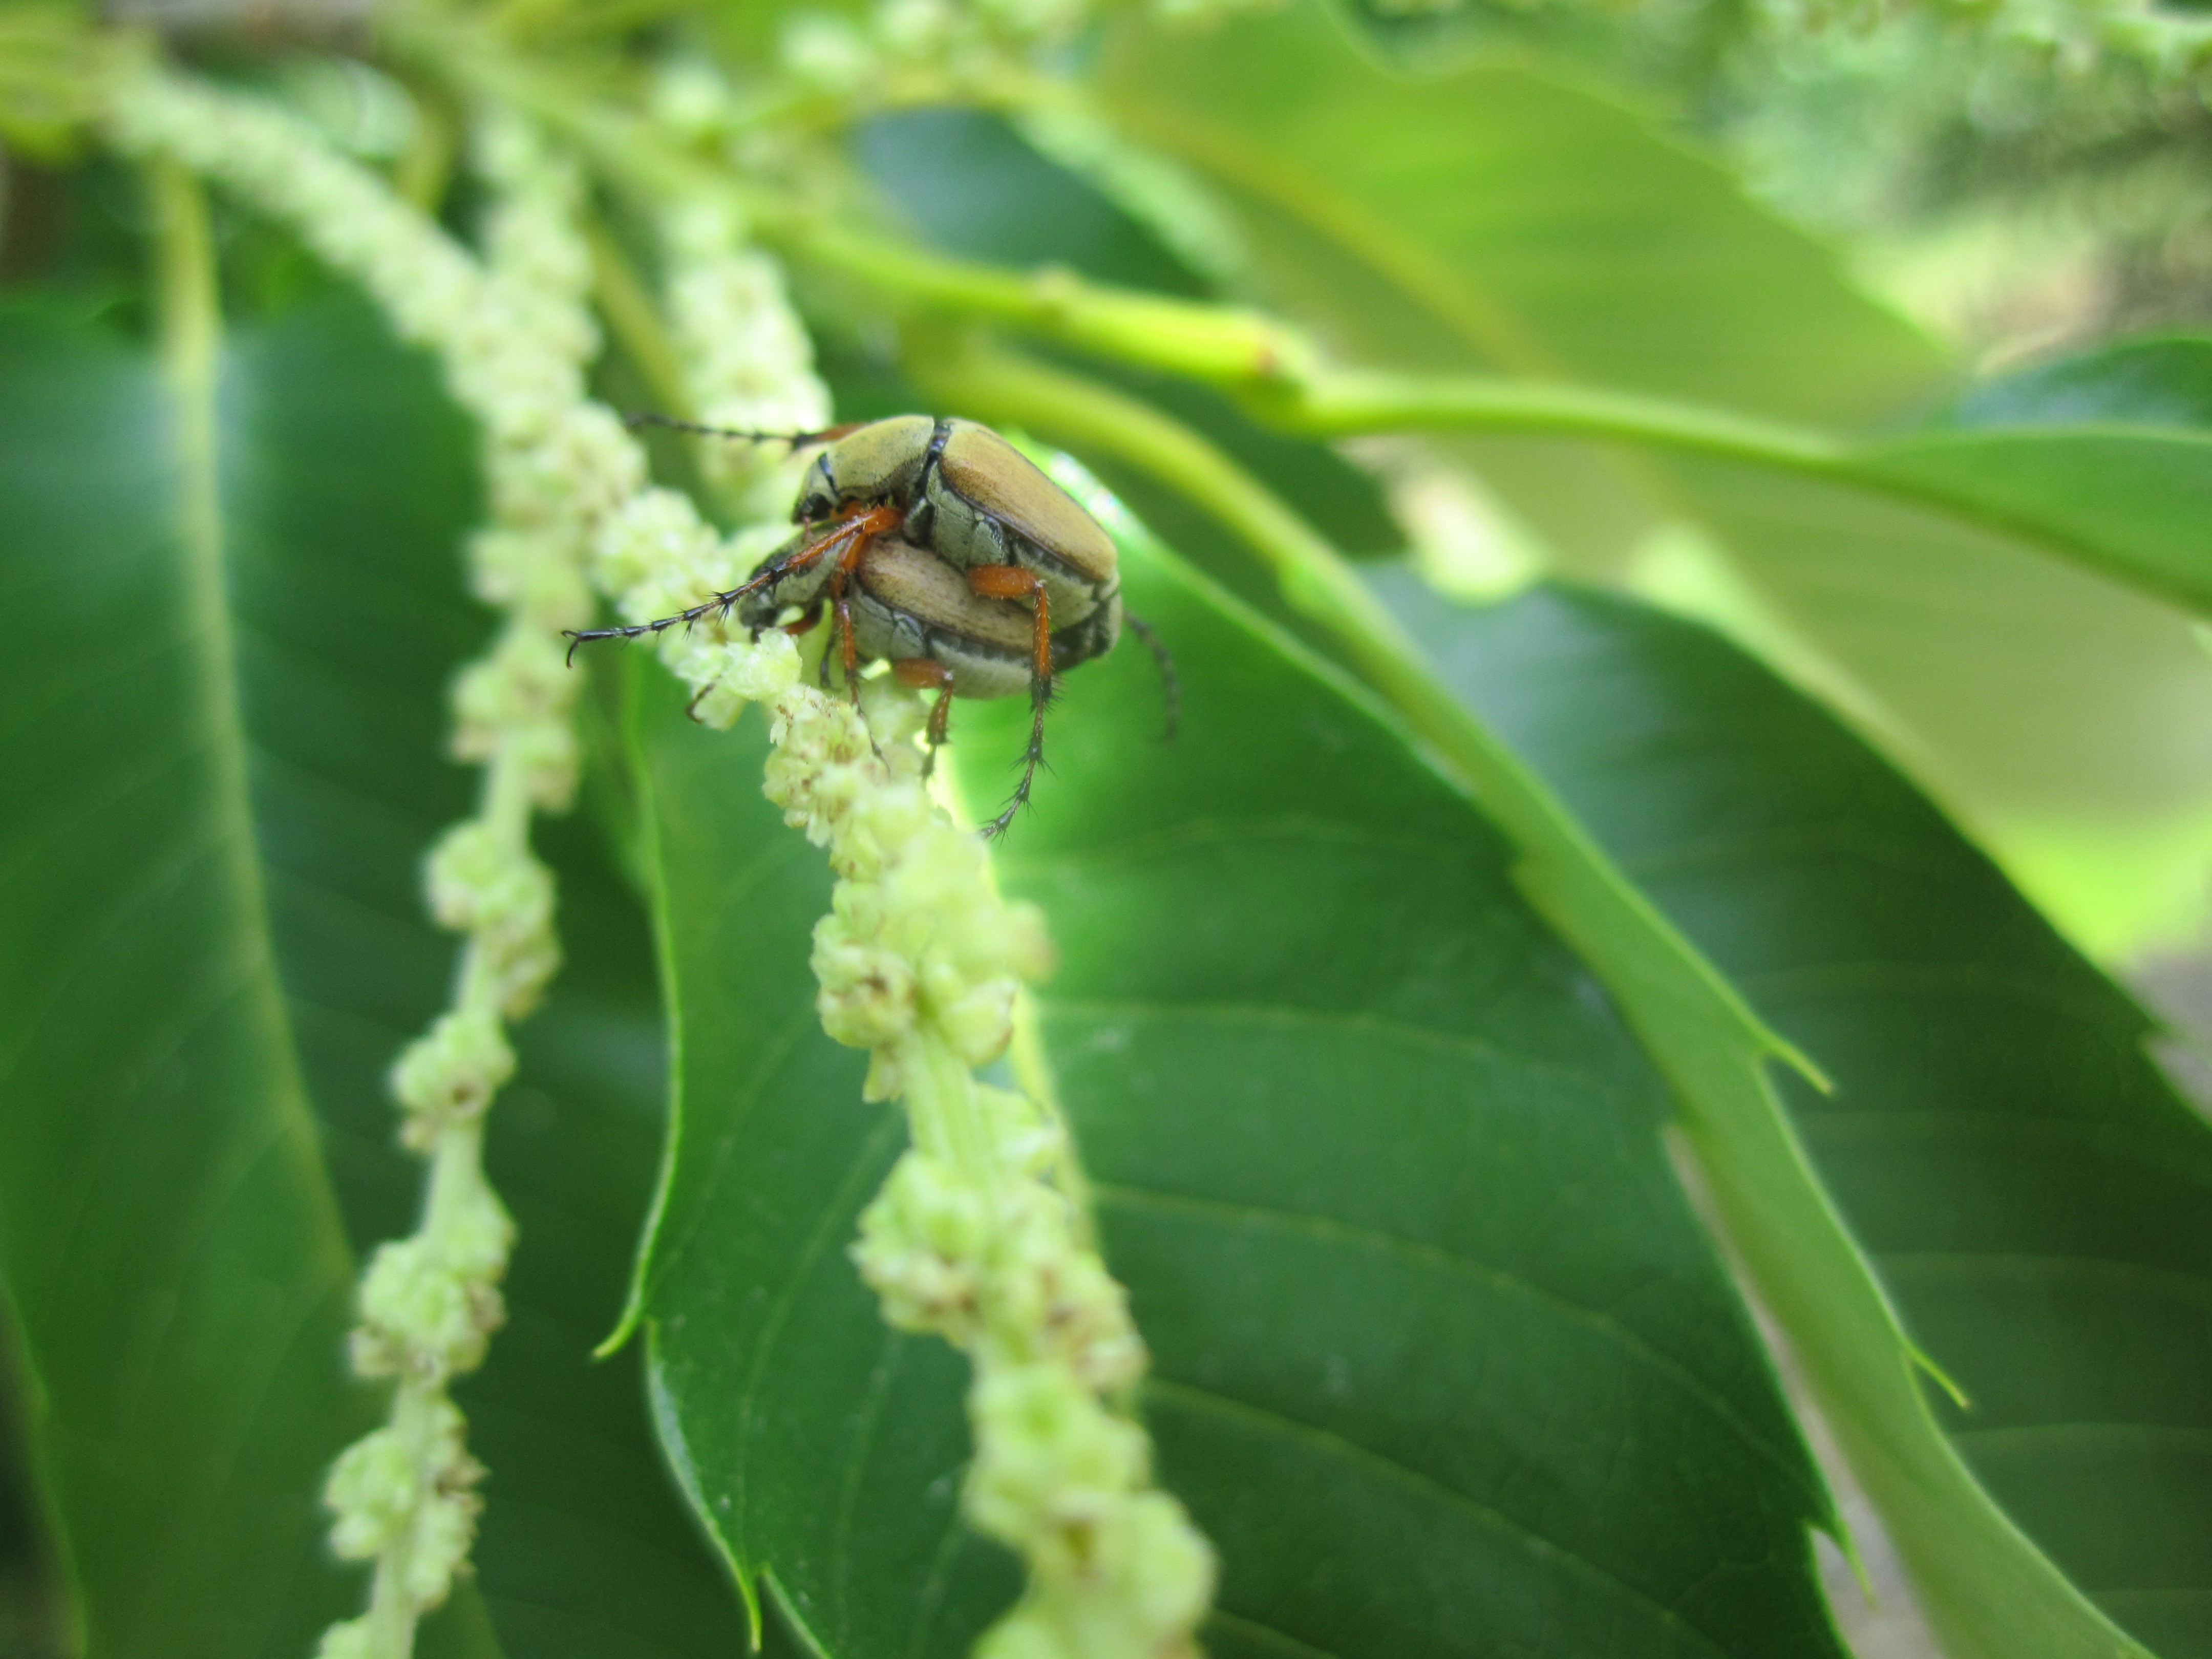 Adult rose chafer beetles mating